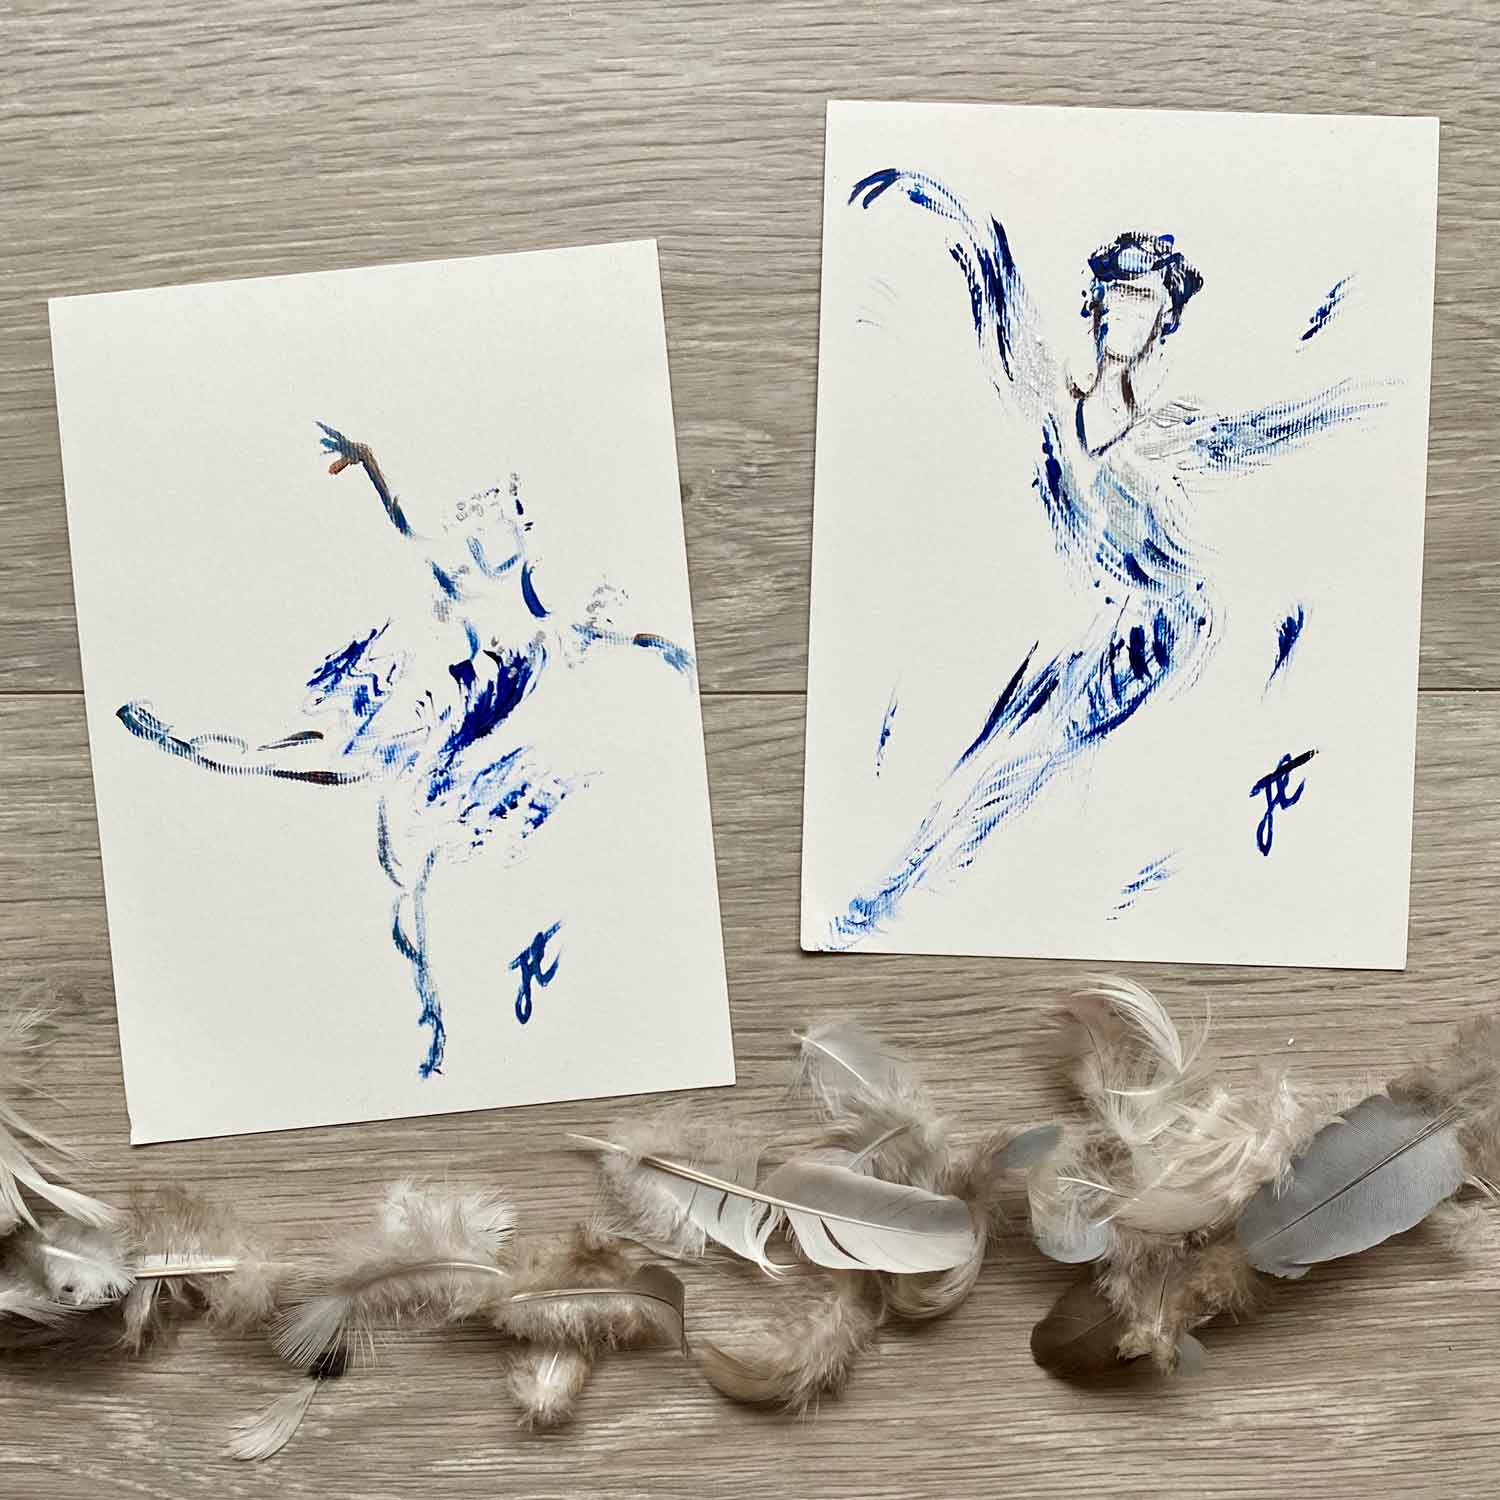 Princess Florine and the Bluebird – set of two paint sketches